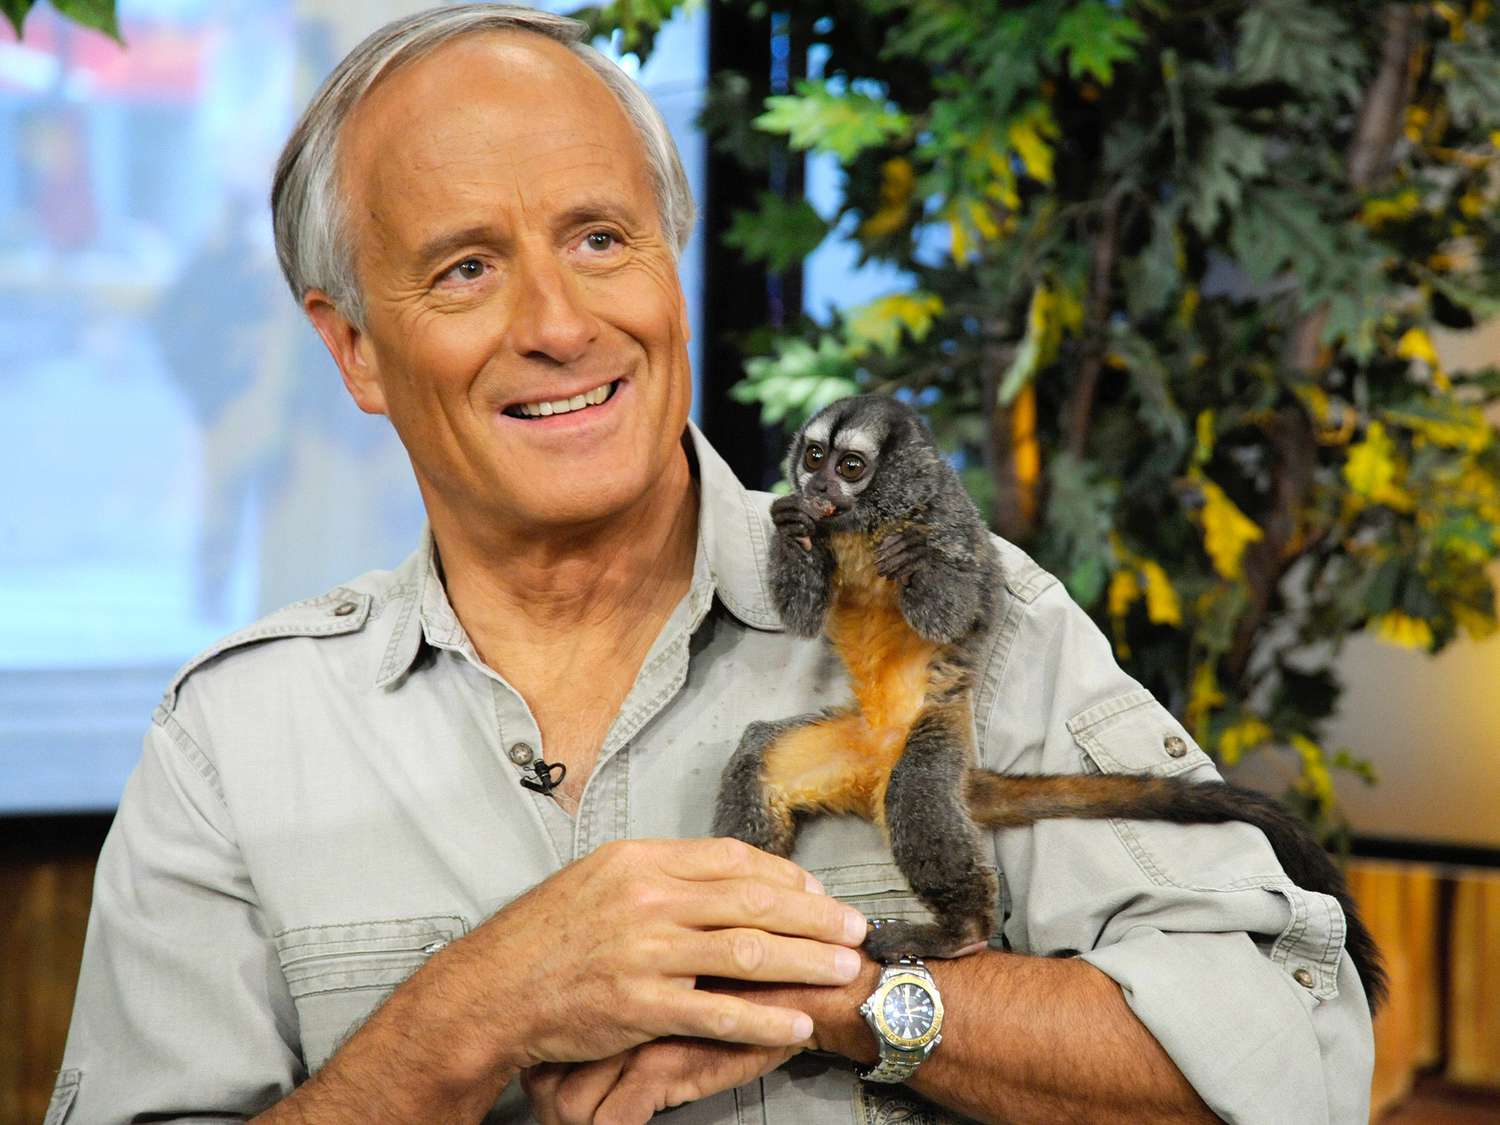 Jack Hanna Continues to Decline Due to Alzheimers [Video]